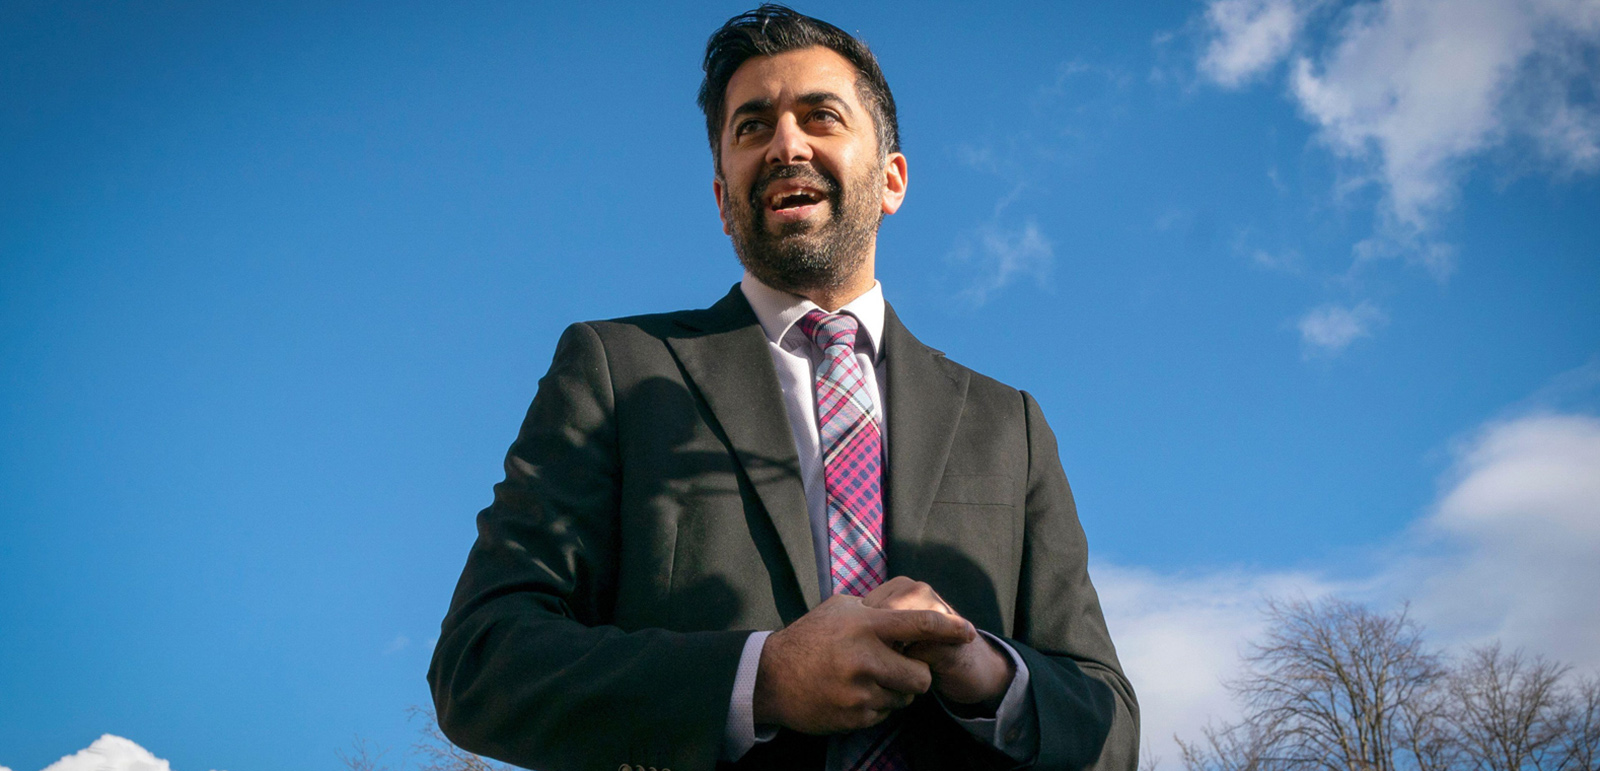 Humza Yousaf Elected as New SNP leader and Scotland's First Minister